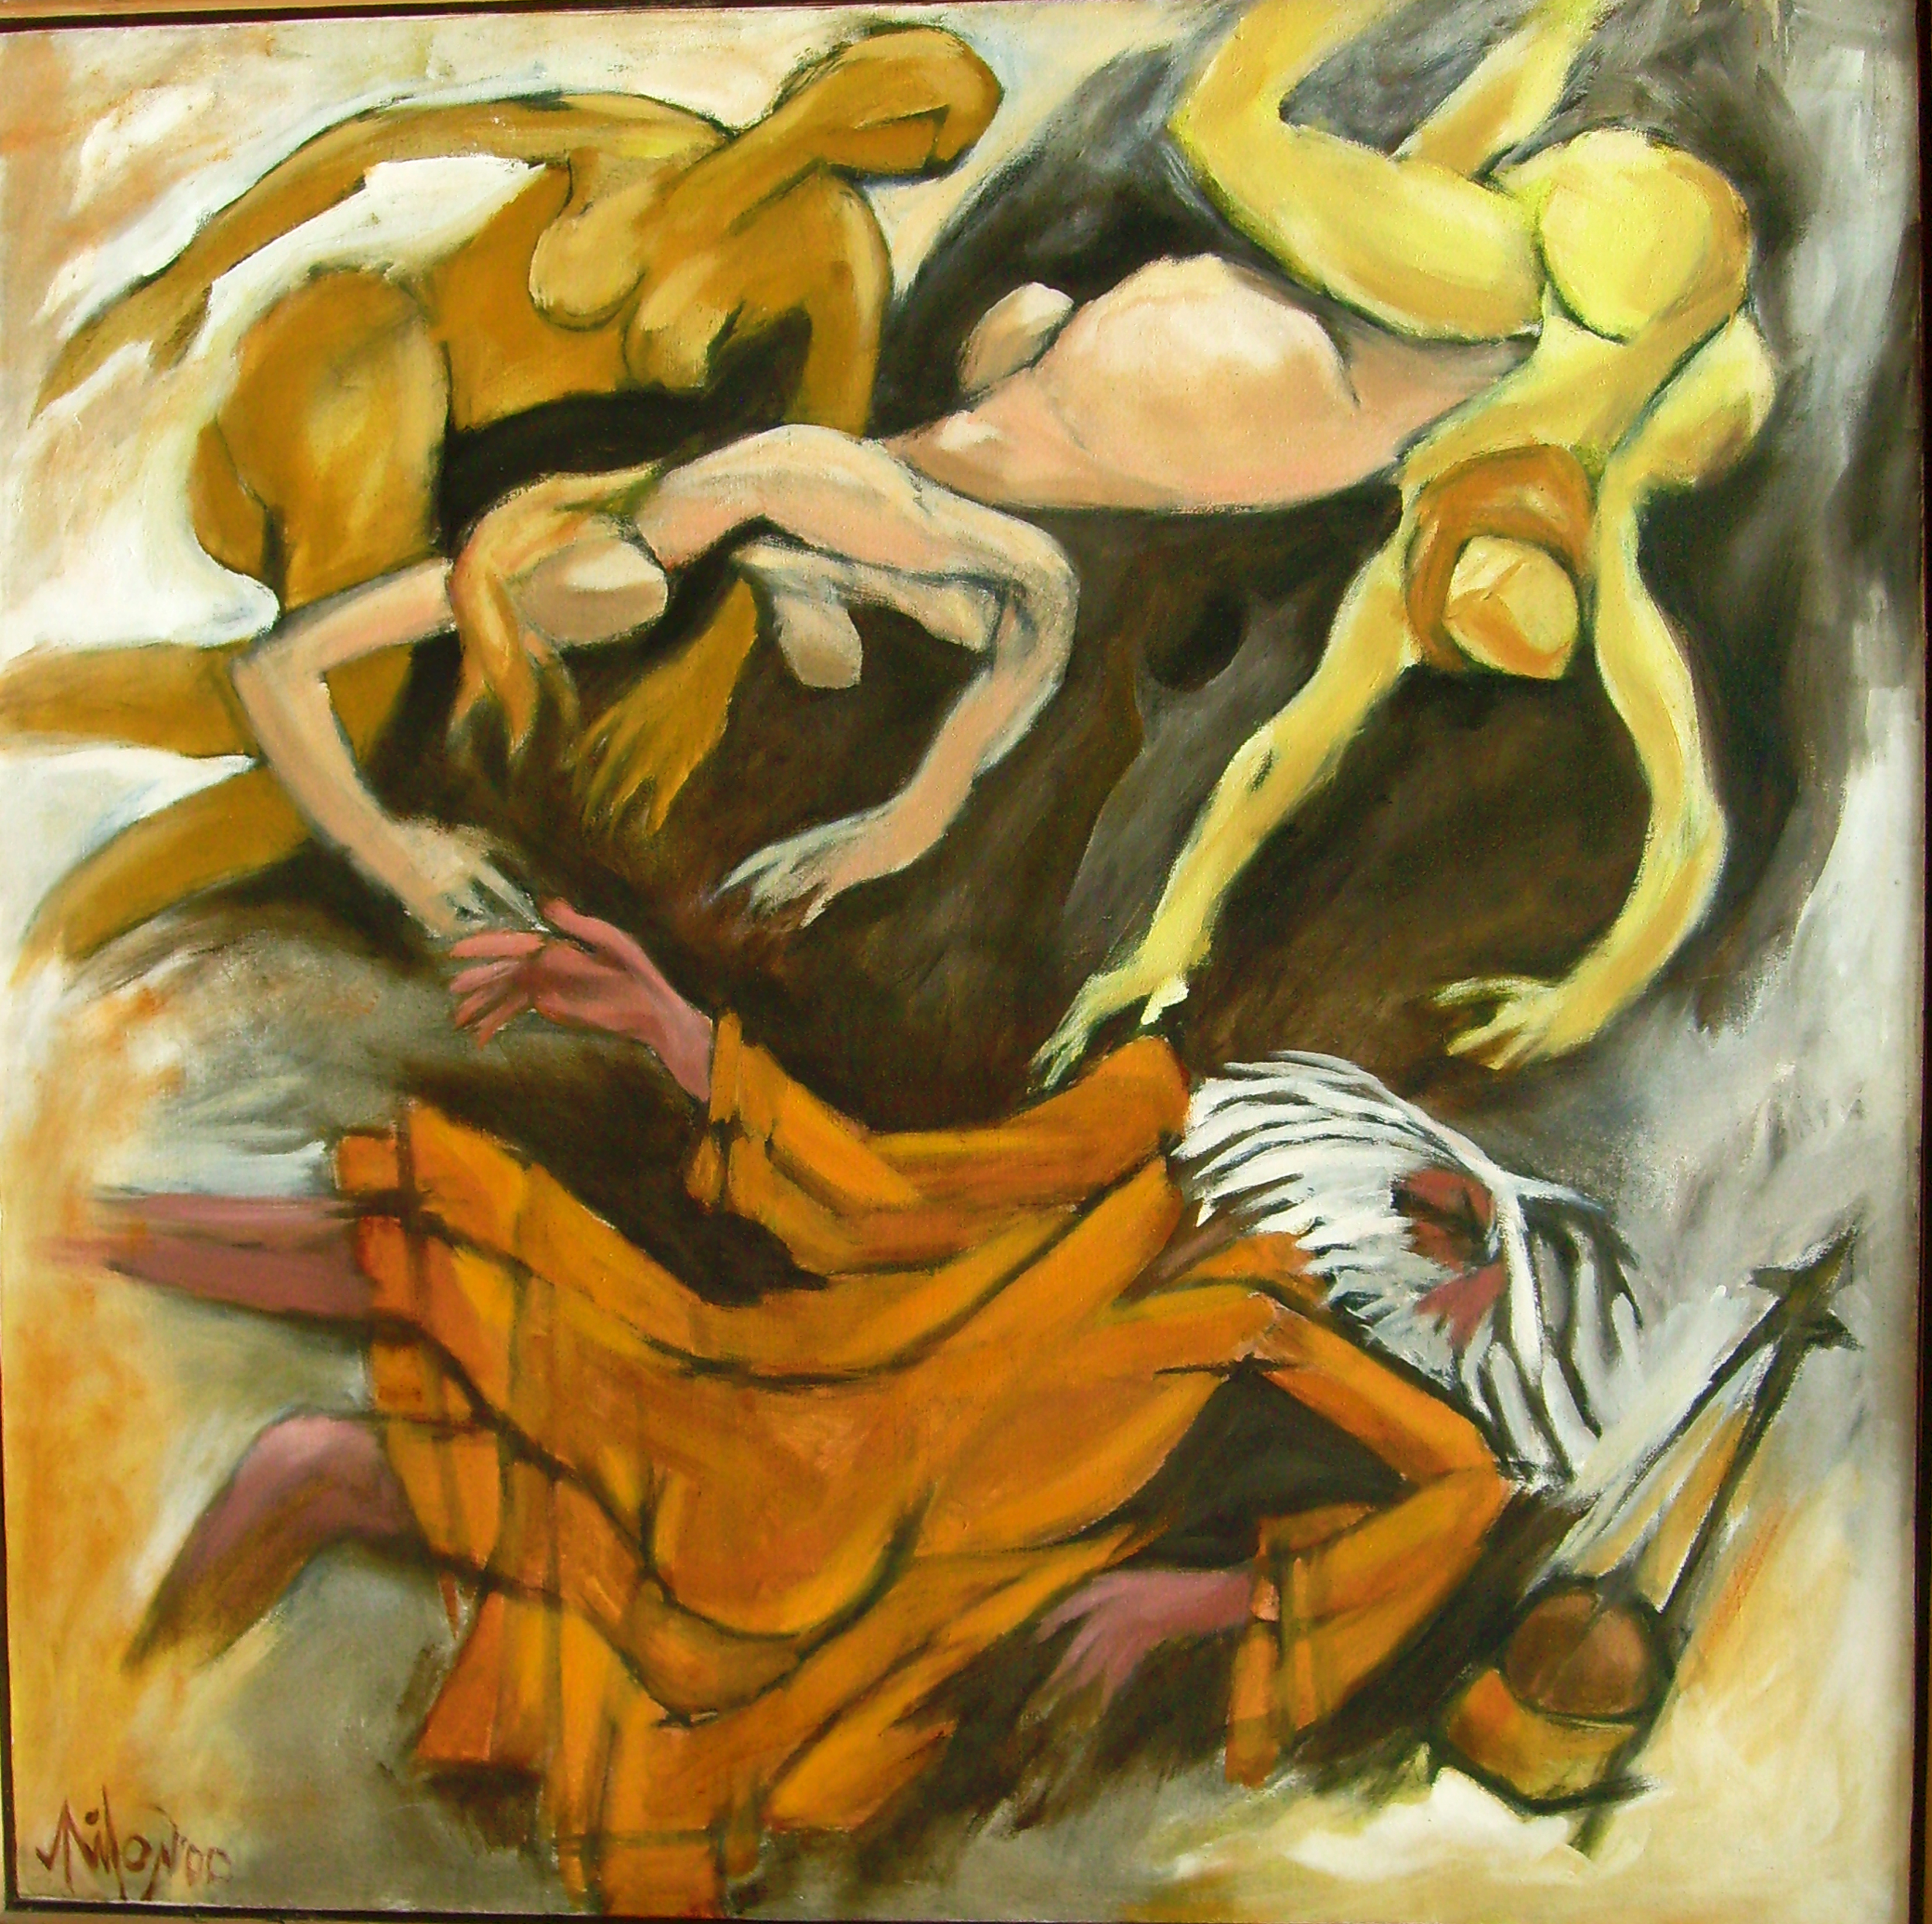 BUY CONTEMPORARY PAINTING ONLINE - 'FALLING BAUL'